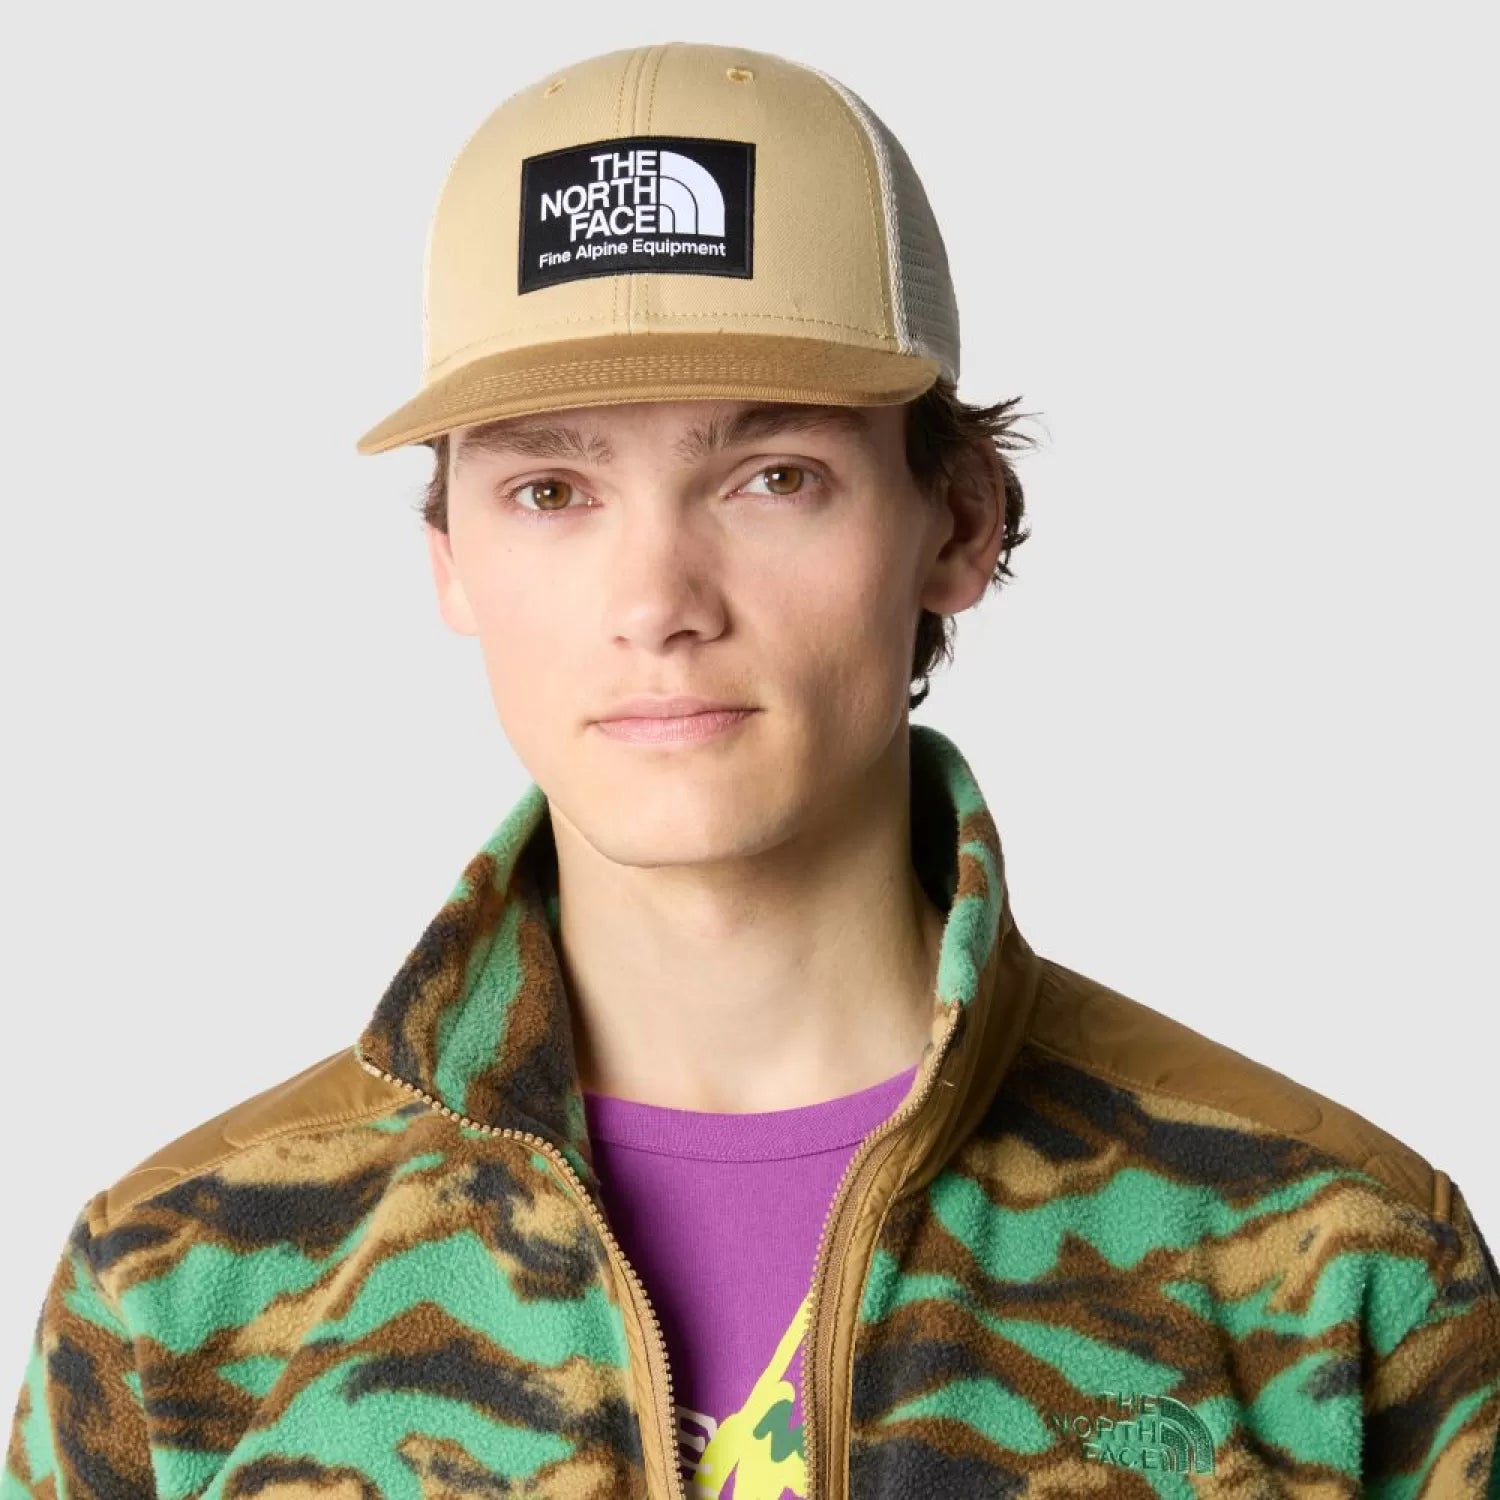 The North Face cappello Deep Fit Mudder NF0A5FX8WK21 UTILITY BROWN/KHAKI STONE